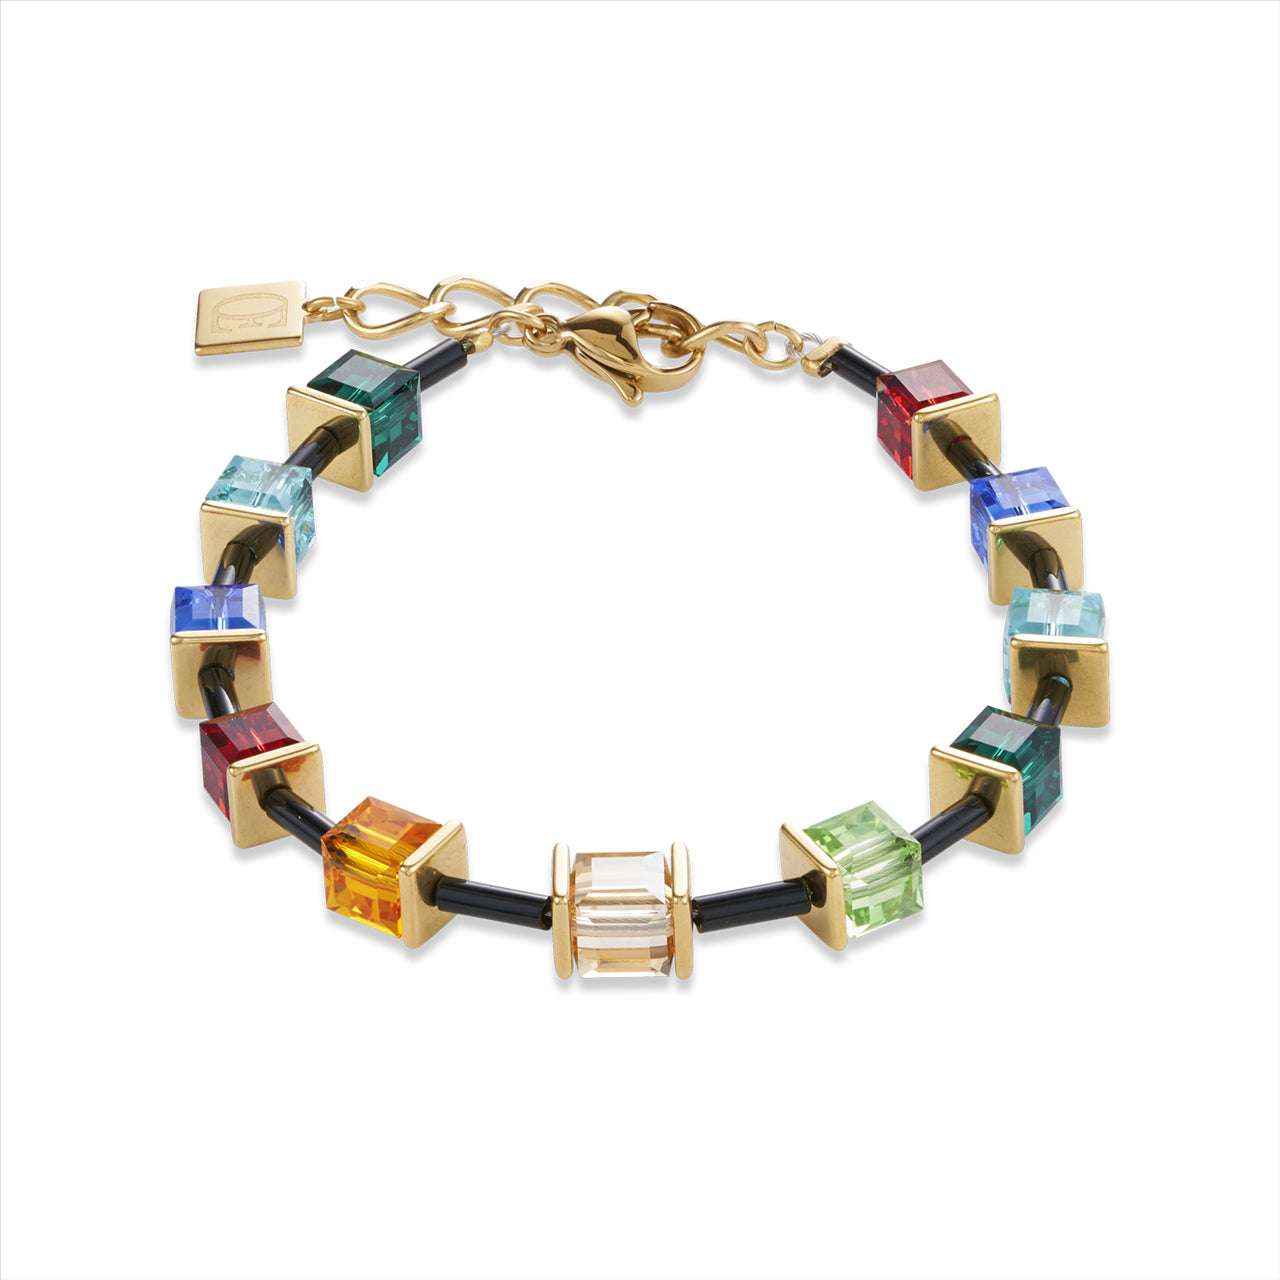 CDL - Limited edition, Gold plated stainless steel with glass & multi coloured Swarovski crystals